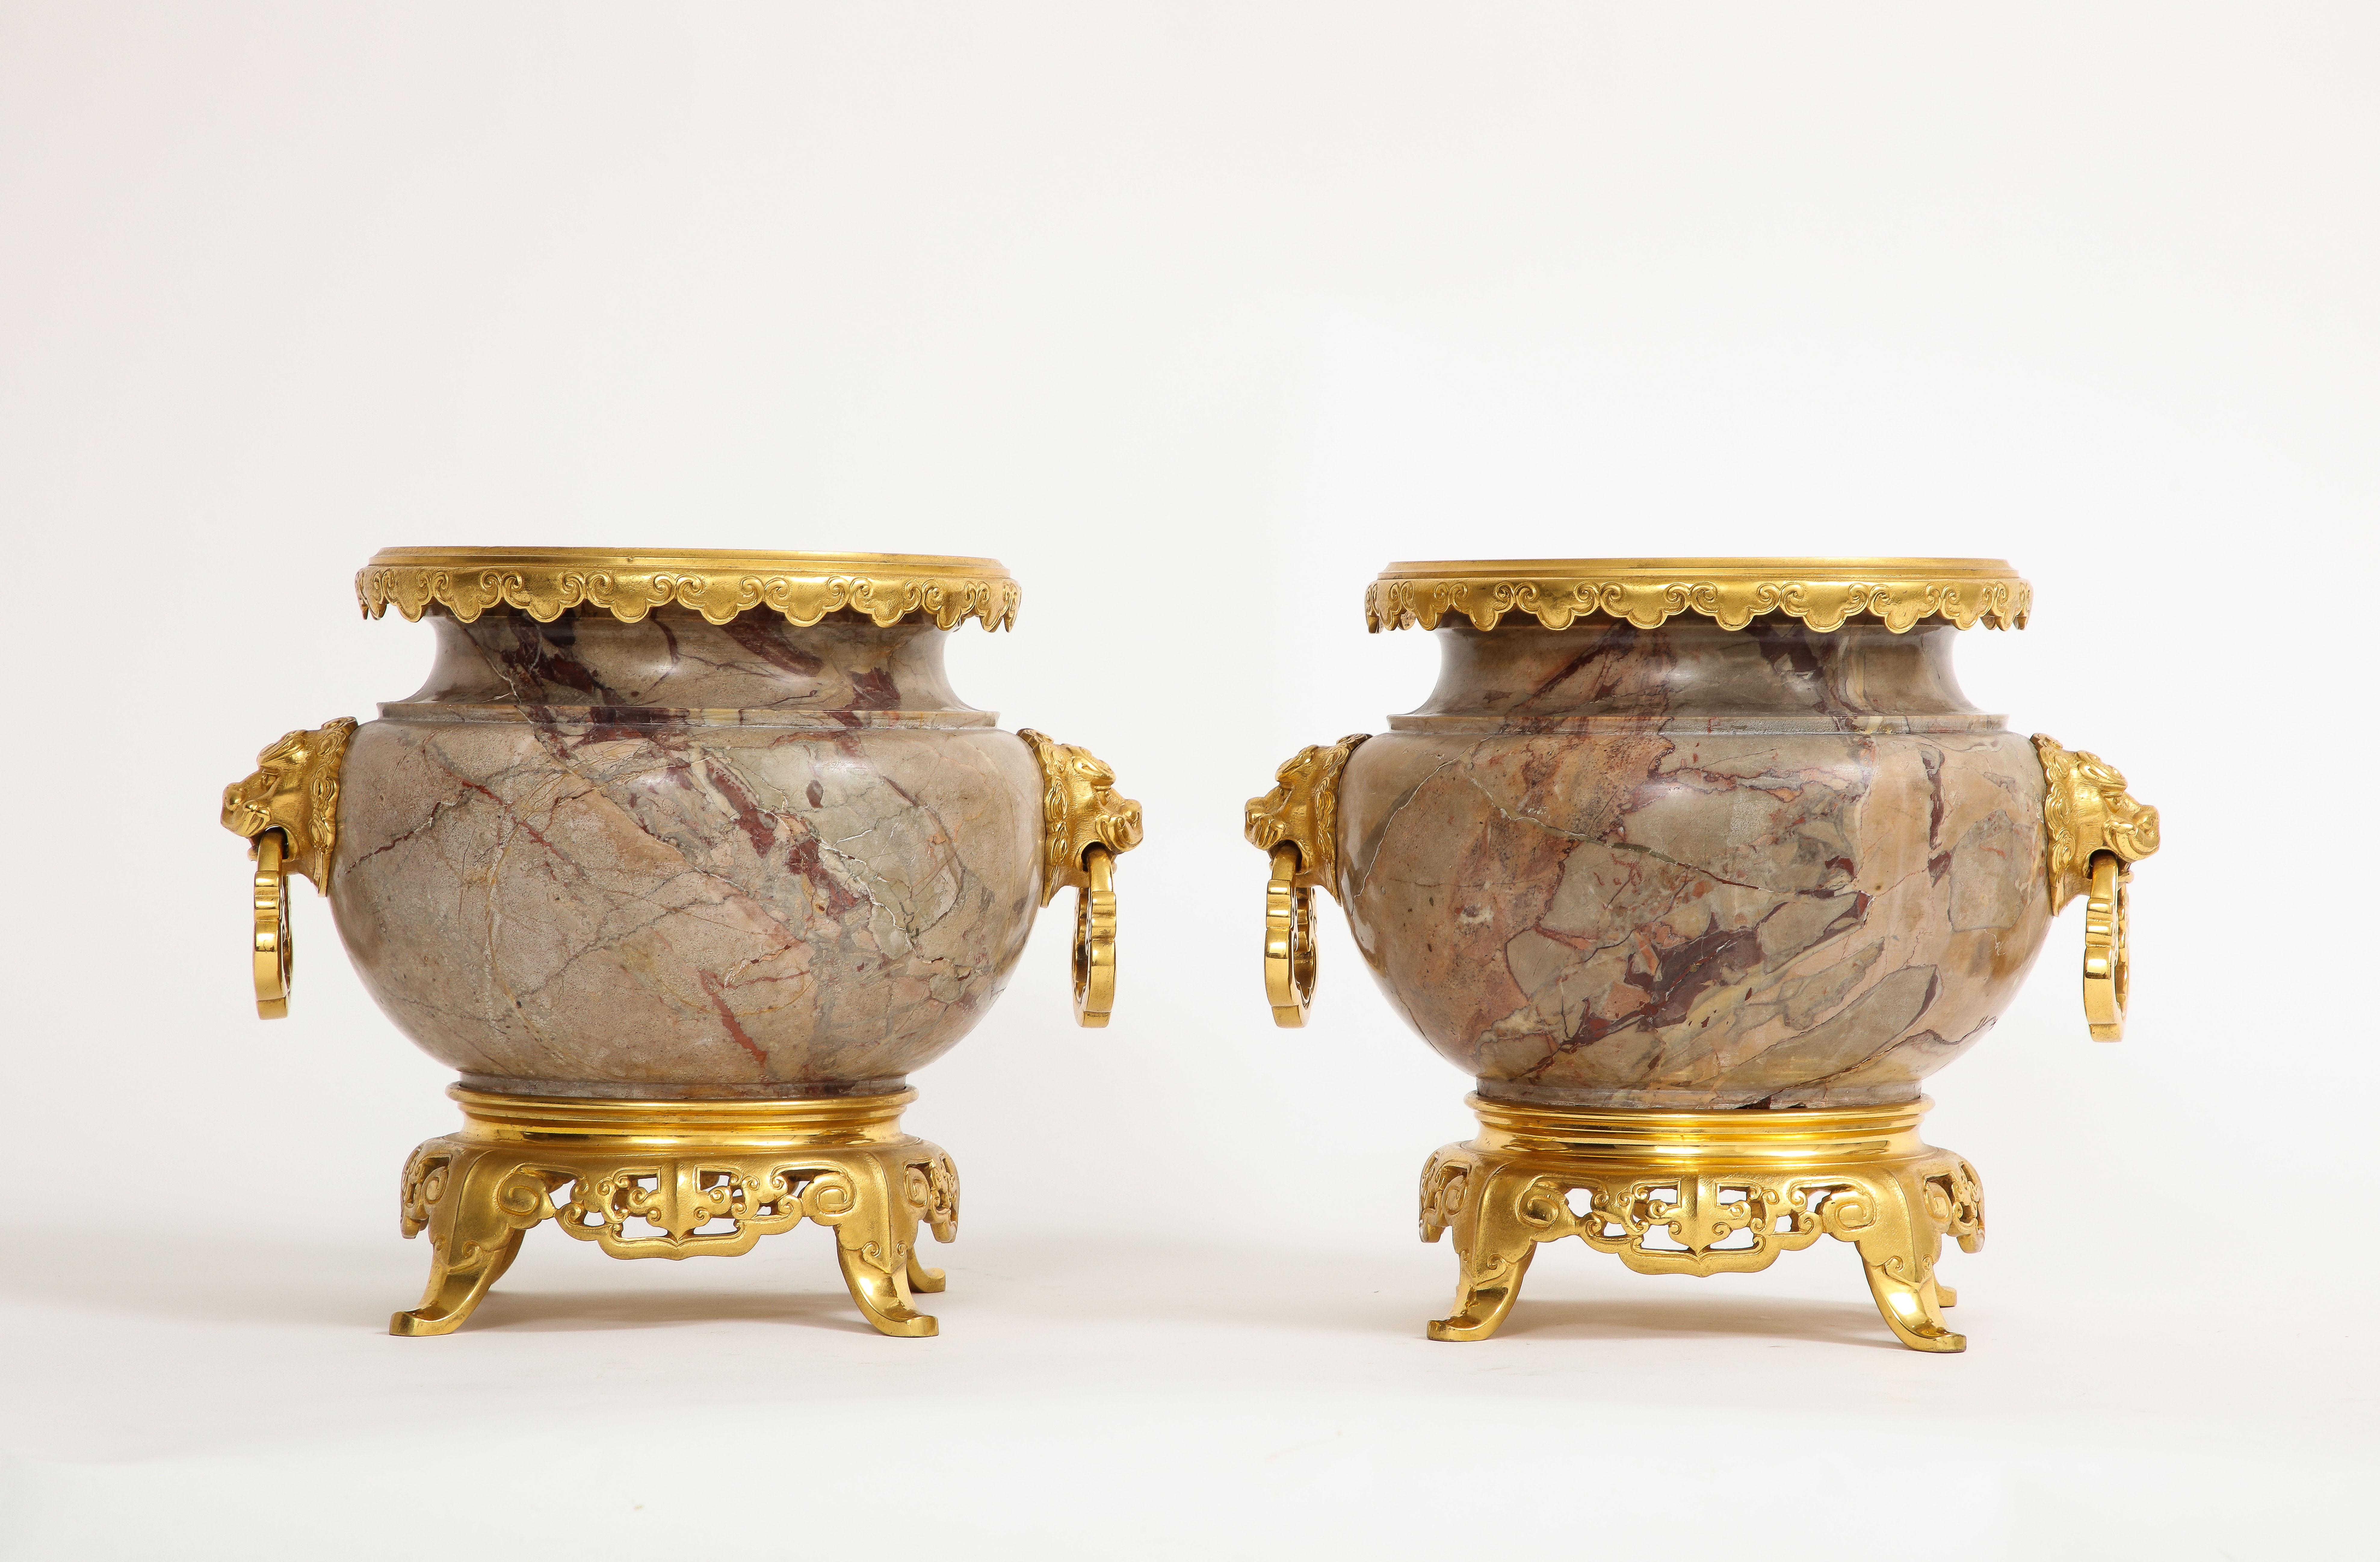 A Pair of 19th century French Ormolu Mounted Marble Centerpieces, Attributed to E. Lievre, Signed on the Bottom. Each bulbous-bodied centerpiece is set on Chinese-style ormolu bases, each composed of four stylized, scrolled legs. The vases have been